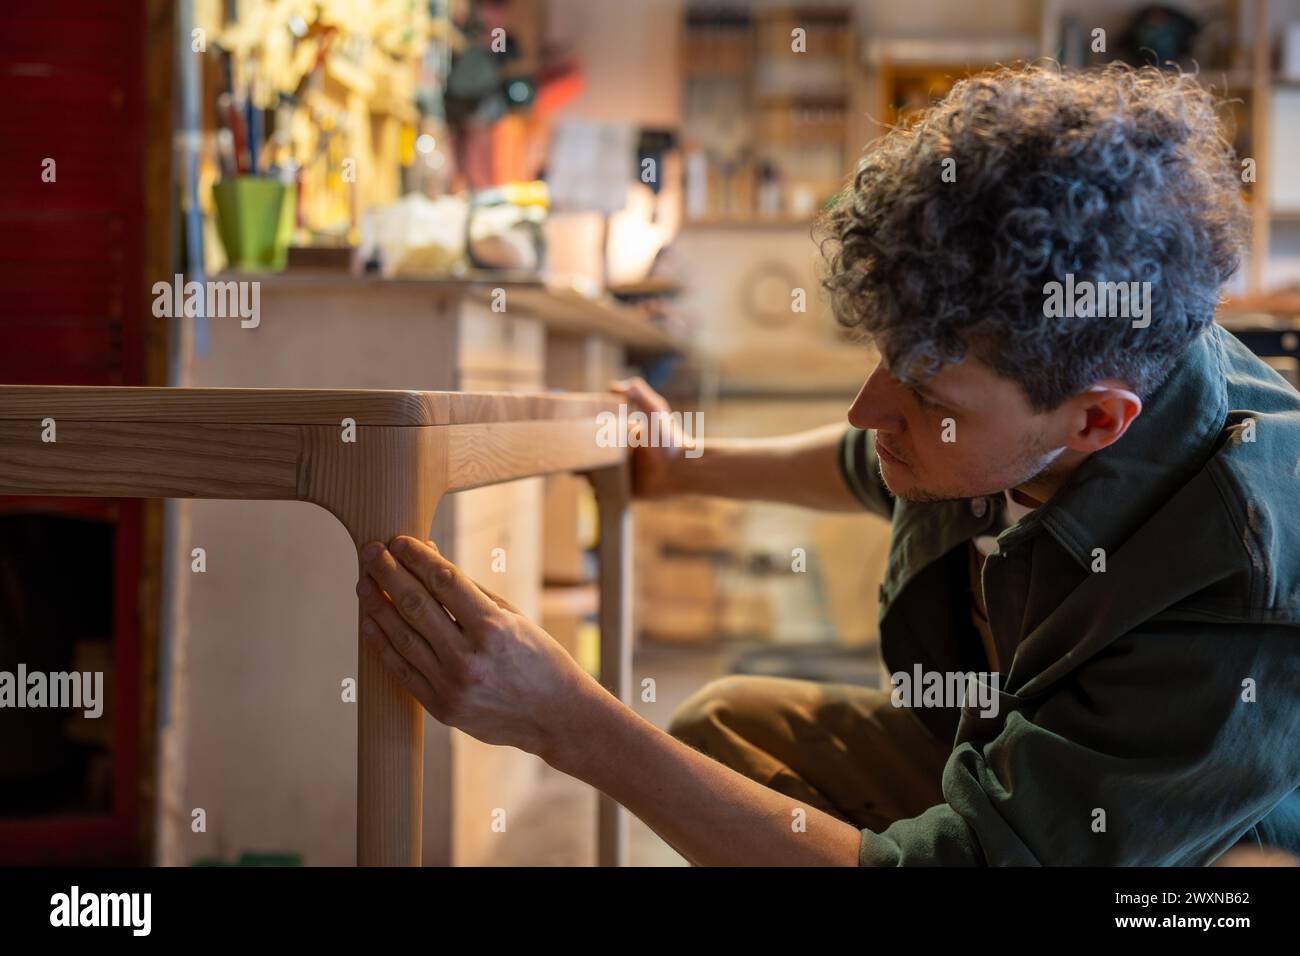 Carpentry workshop, male craftsman working. Professional artisan smiles, checking wooden table Stock Photo